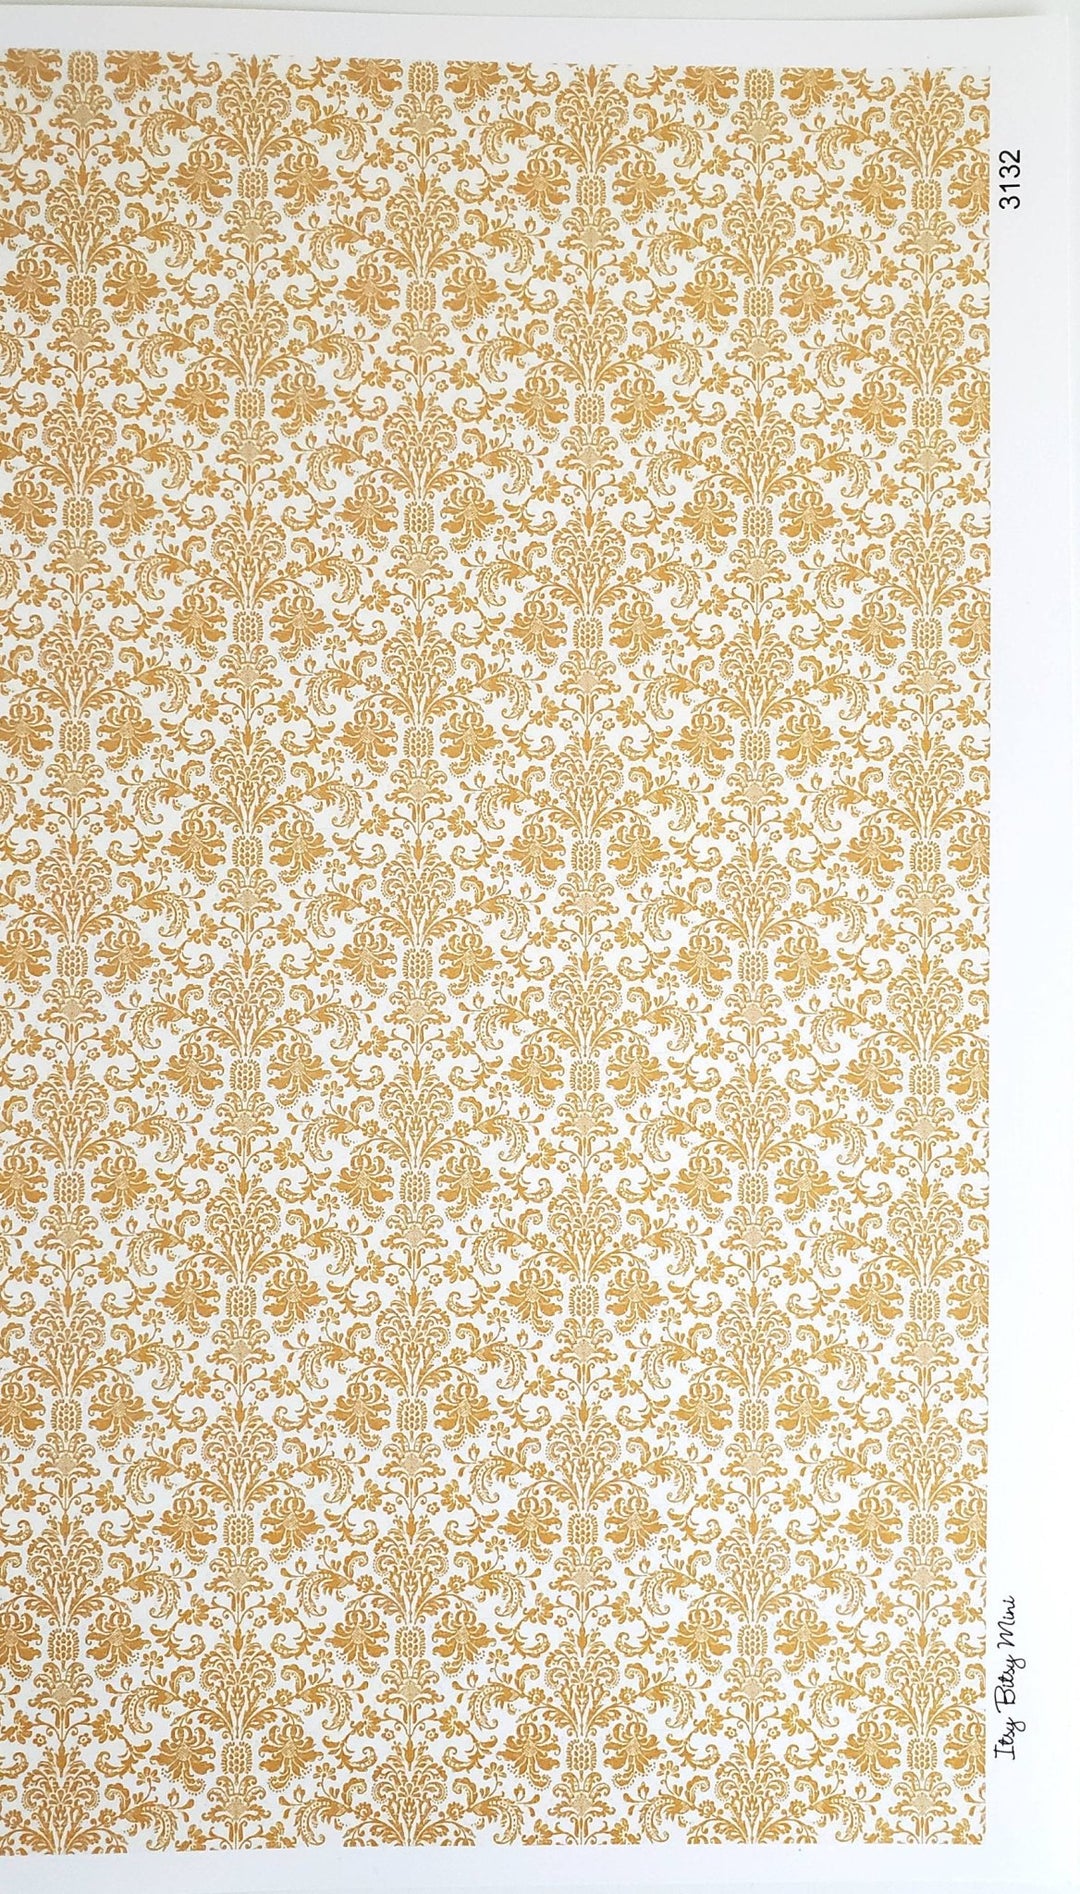 Dollhouse Wallpaper Damask Gold on White Victorian 1:12 Scale Itsy Bitsy Miniatures - Miniature Crush